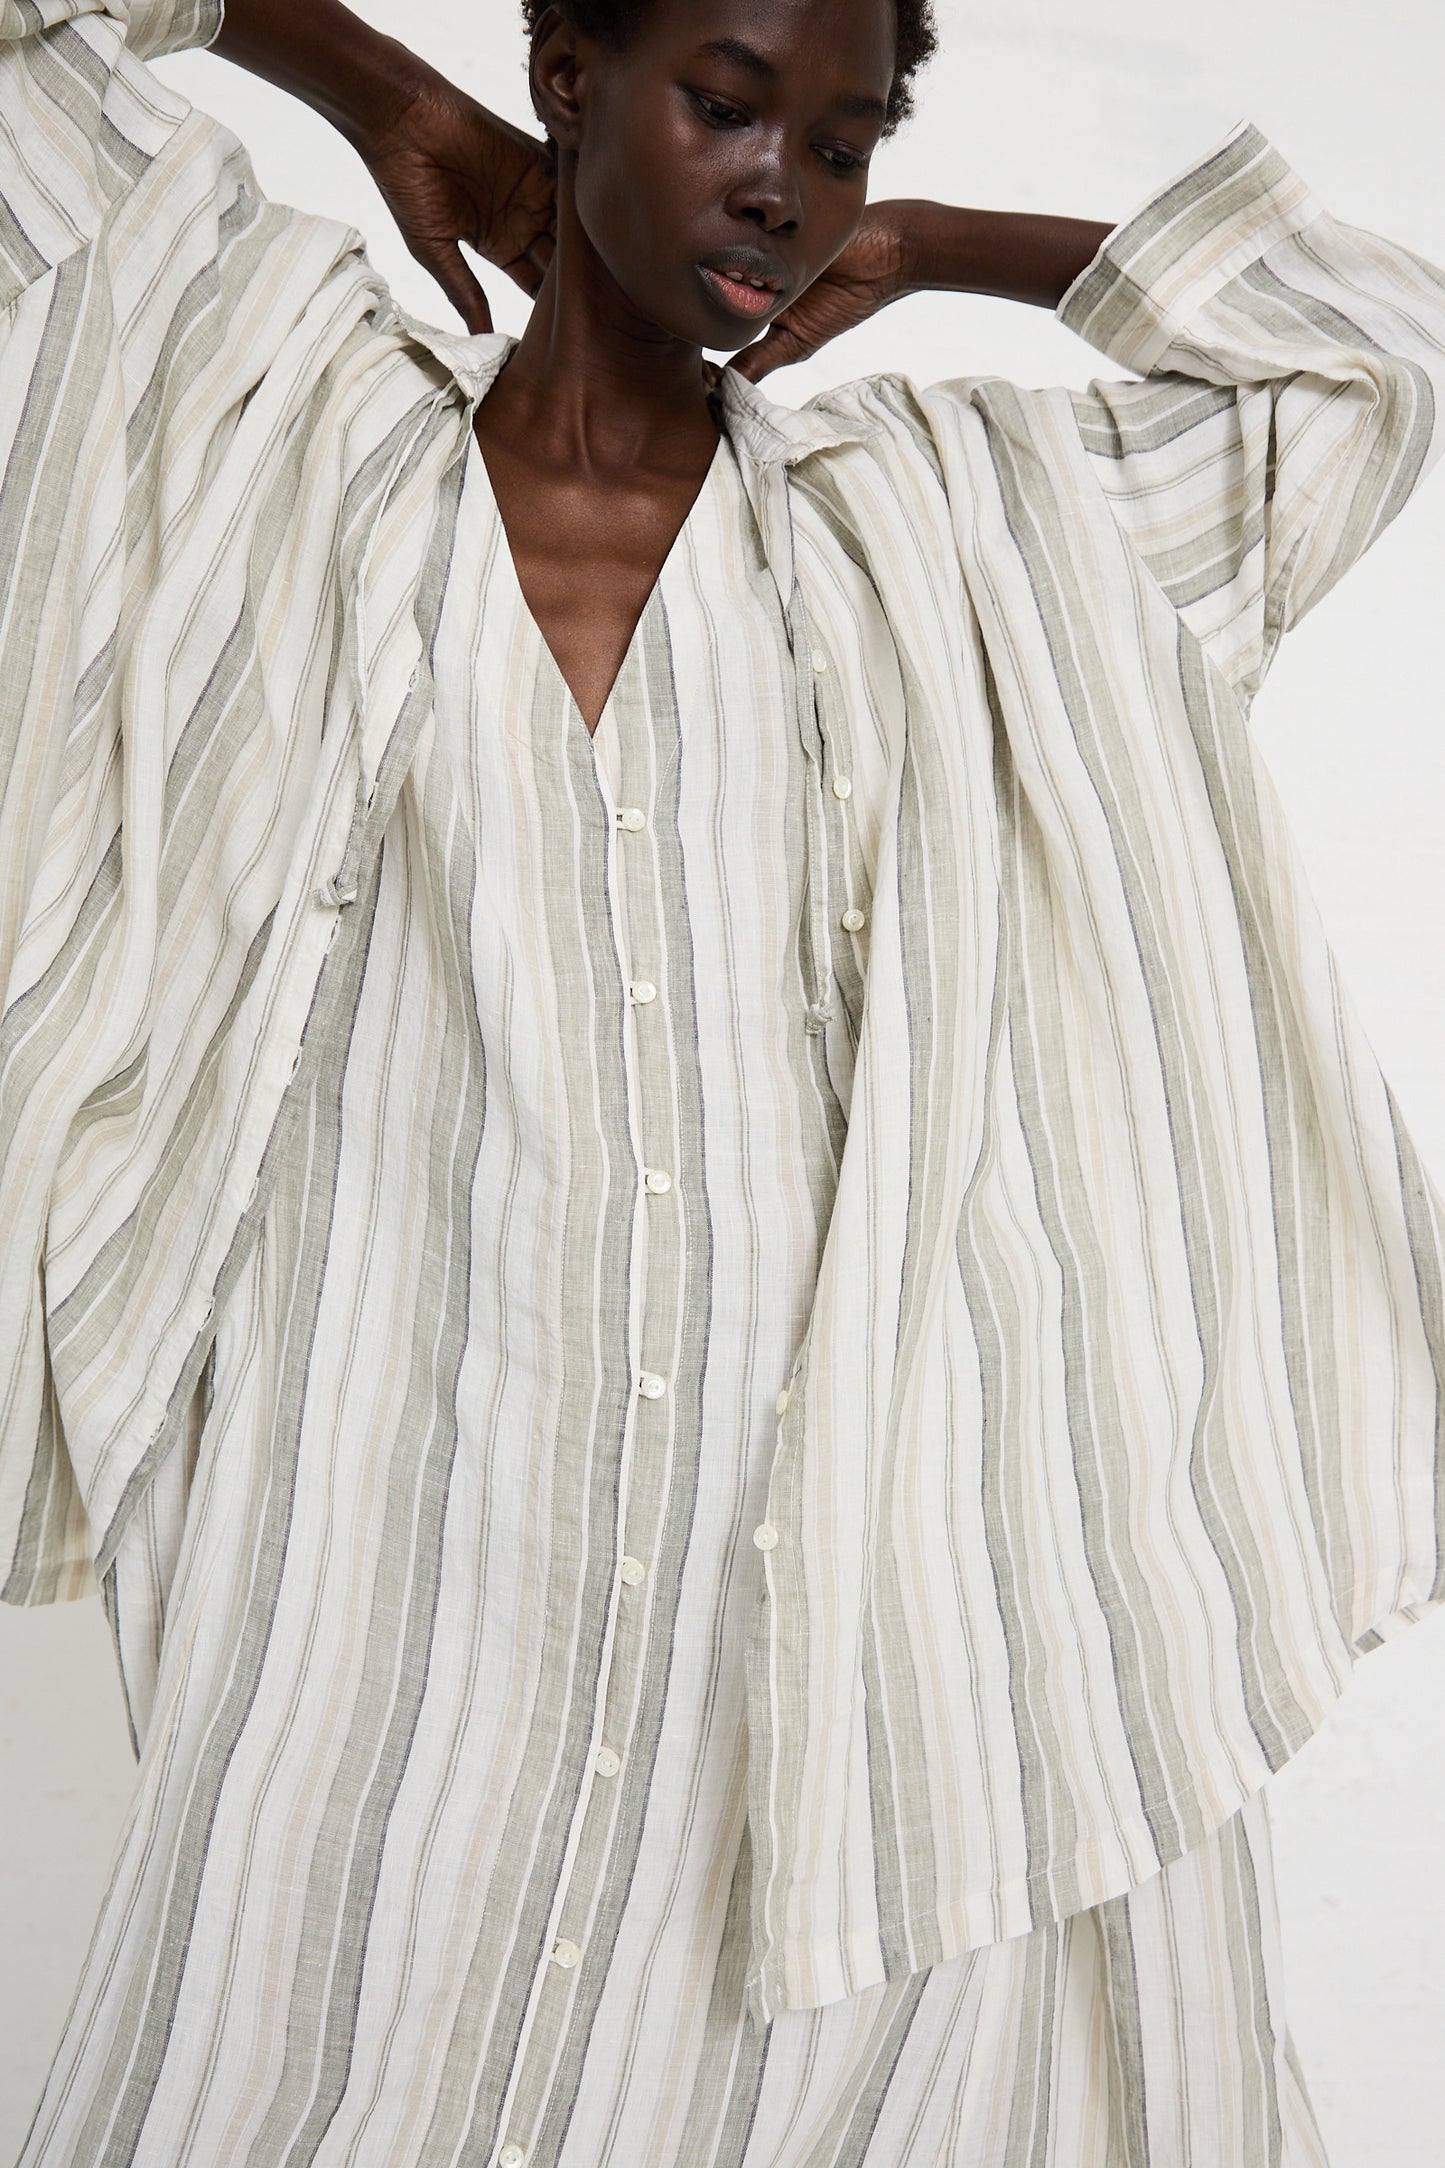 A person wearing a loose-fitting, striped **Linen Long Oversized Shirt in Stripe** by **nest Robe** with a matching striped dress underneath. They have their hands raised, adjusting the collar of the relaxed fit outer garment.